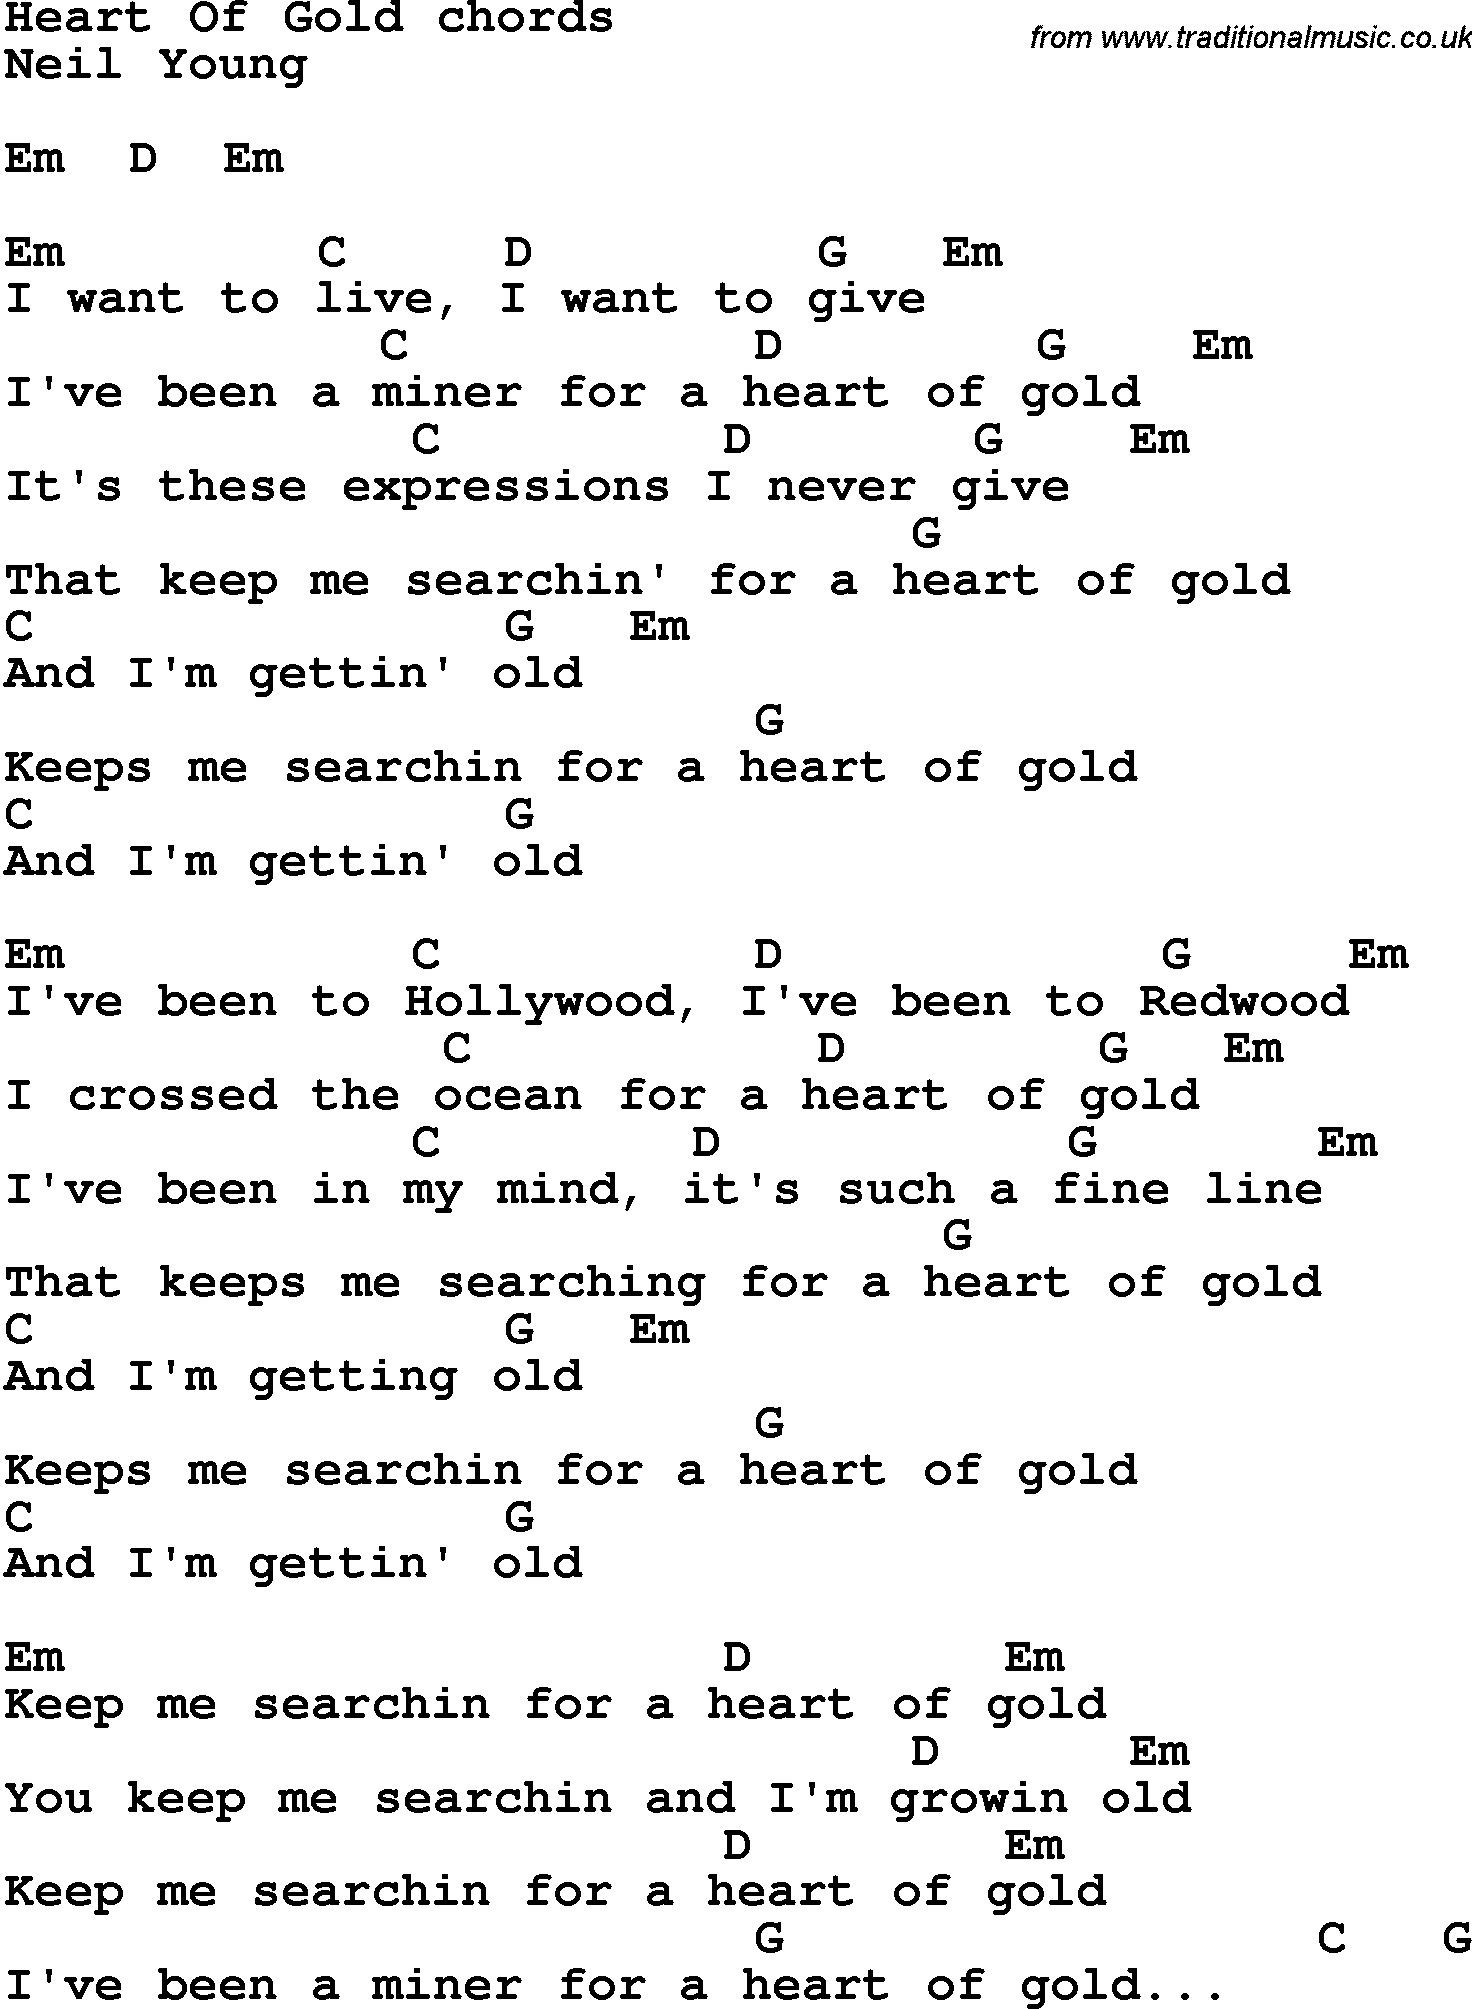 Heart Of Gold Chords Song Lyrics With Guitar Chords For Heart Of Gold